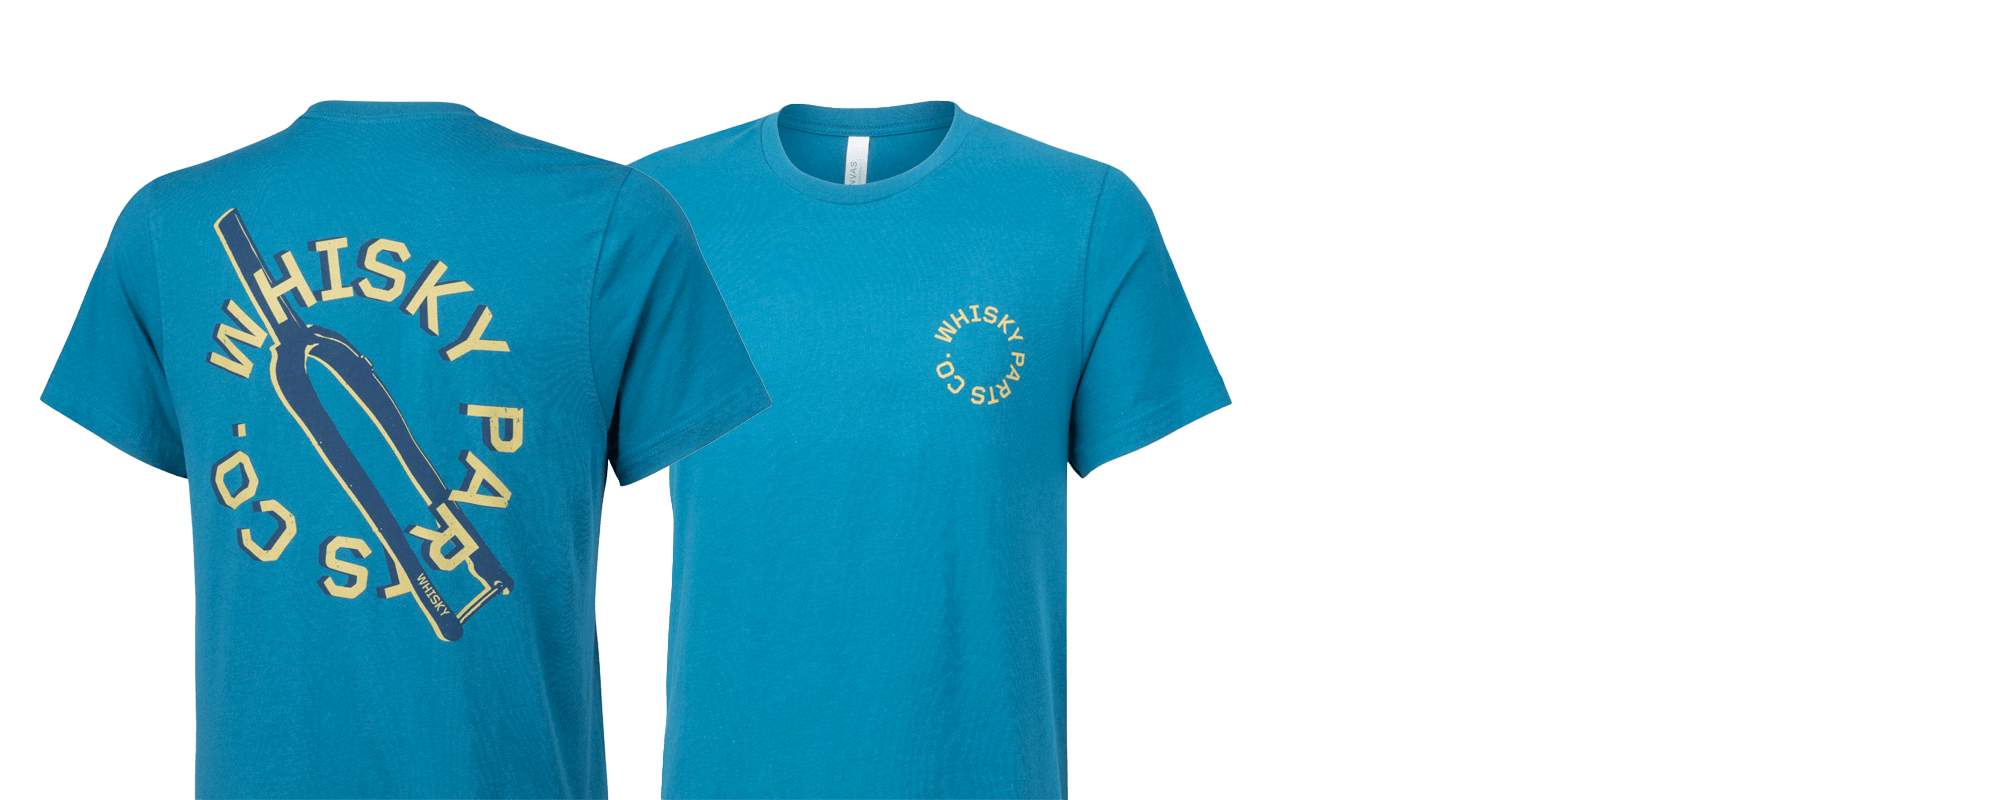 Whisky Prospector T-shirt - Deep Teal/Gold - front and rear views